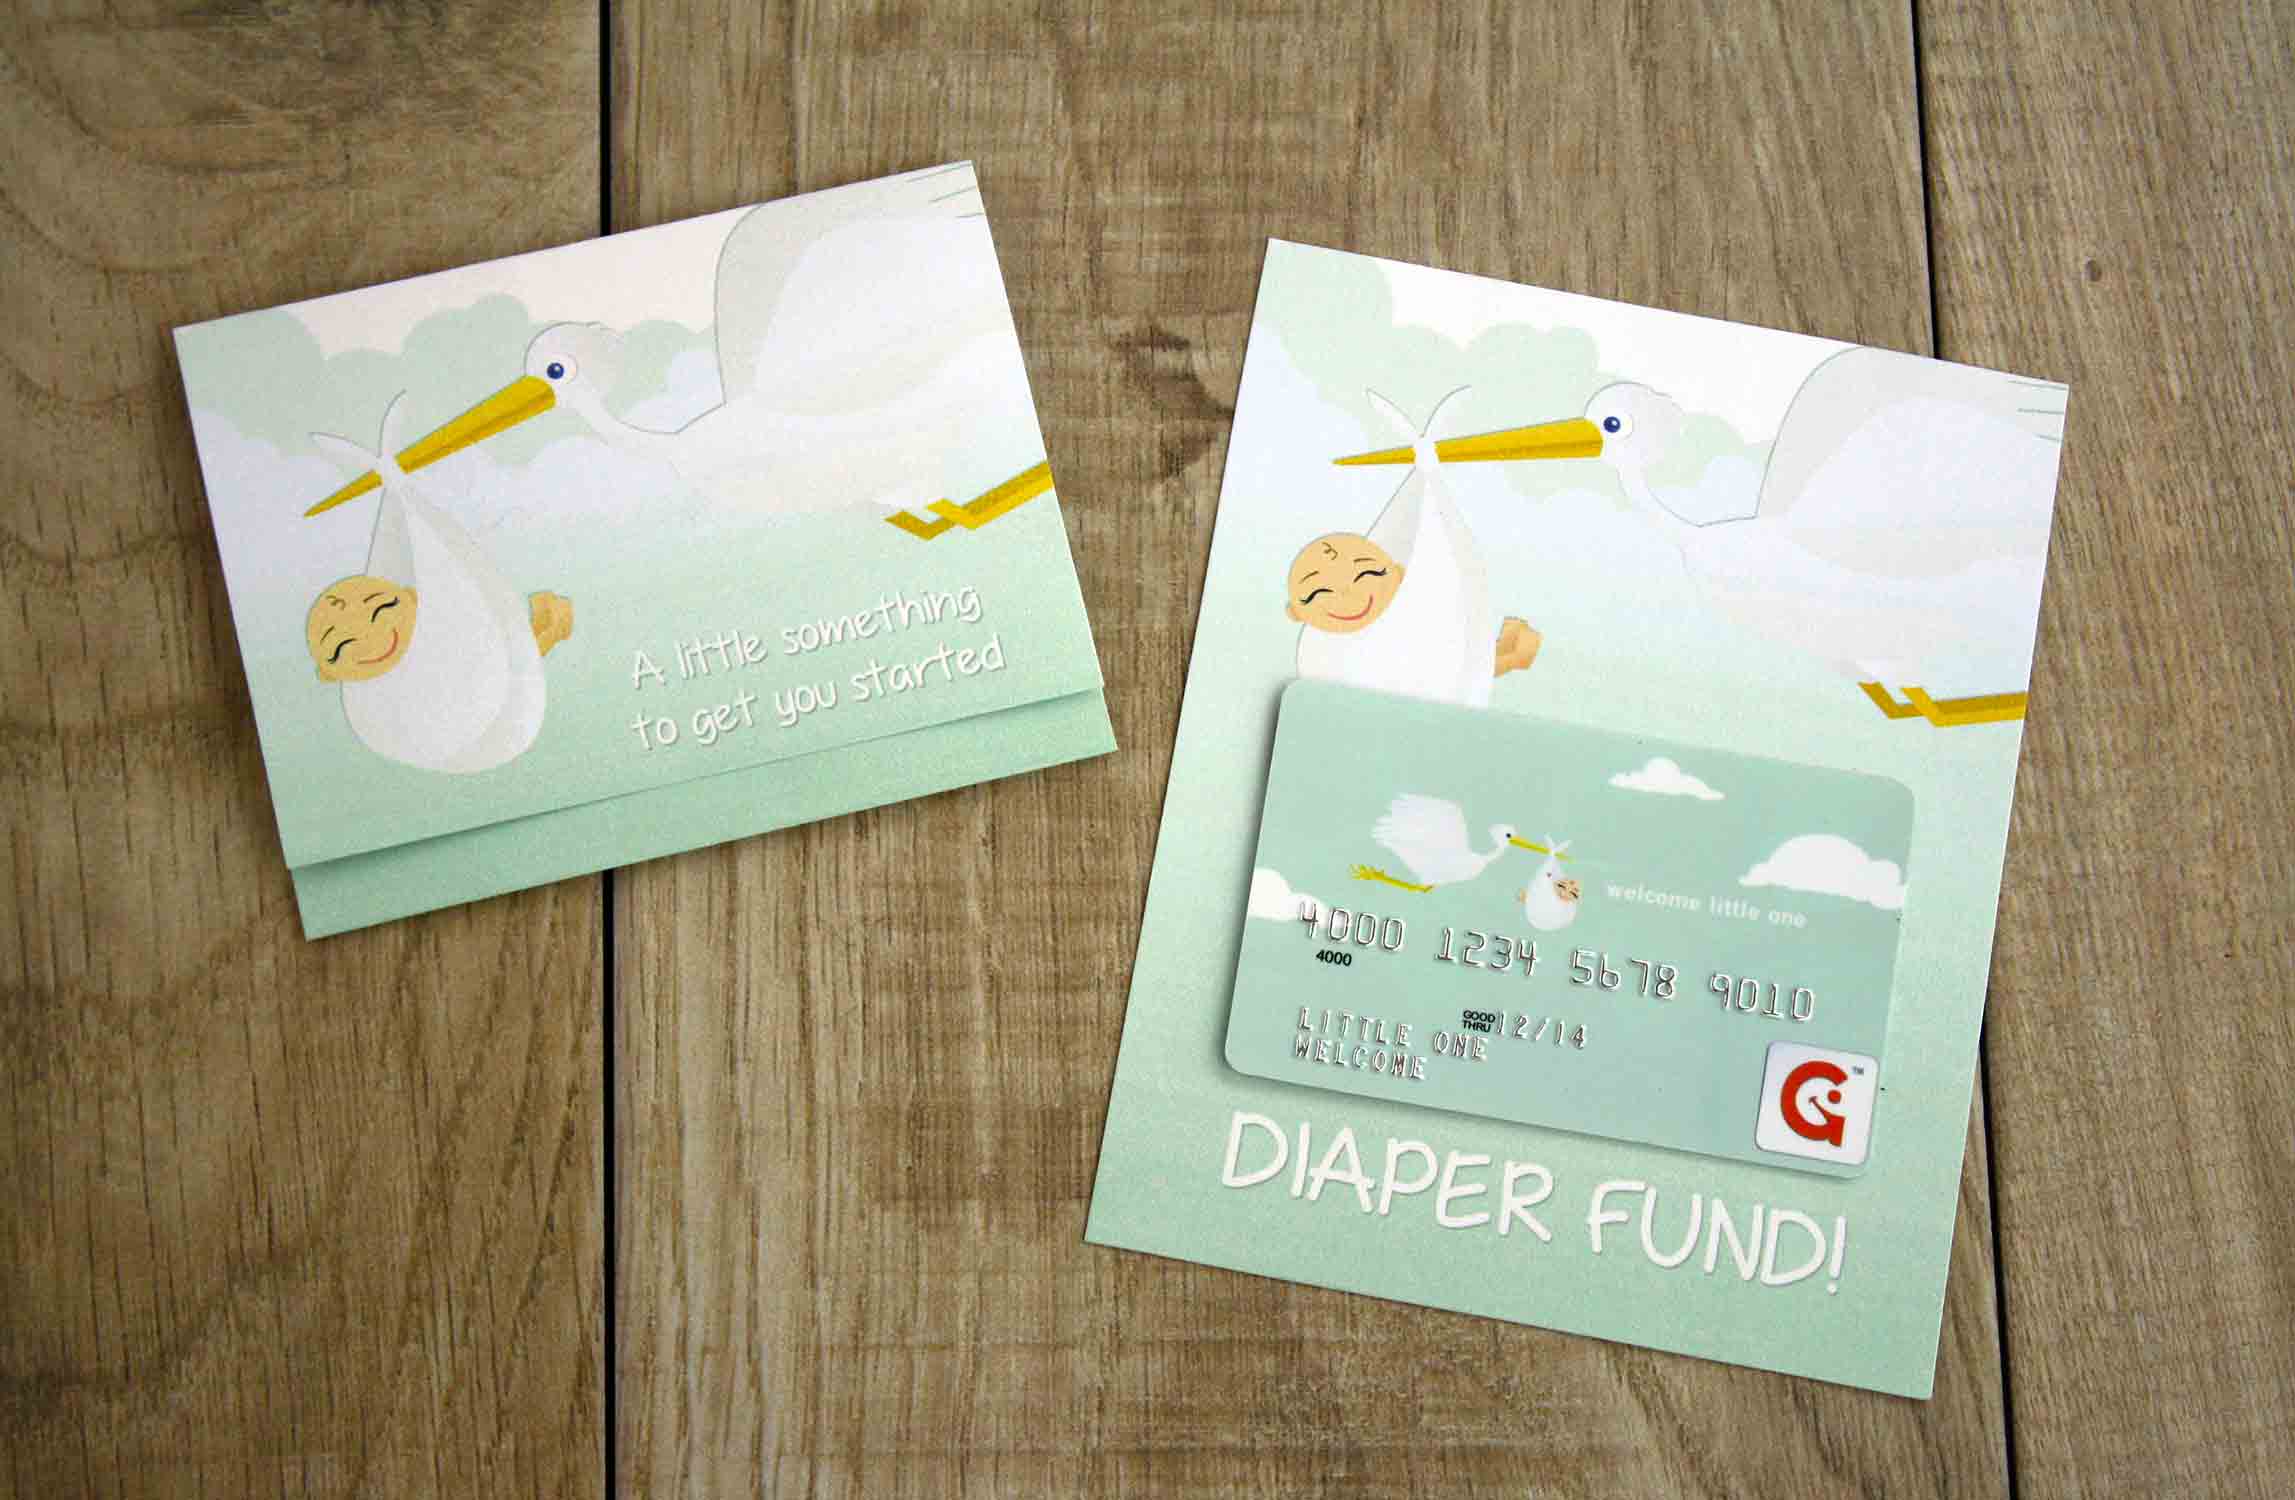 Diaper Fund gift card holders